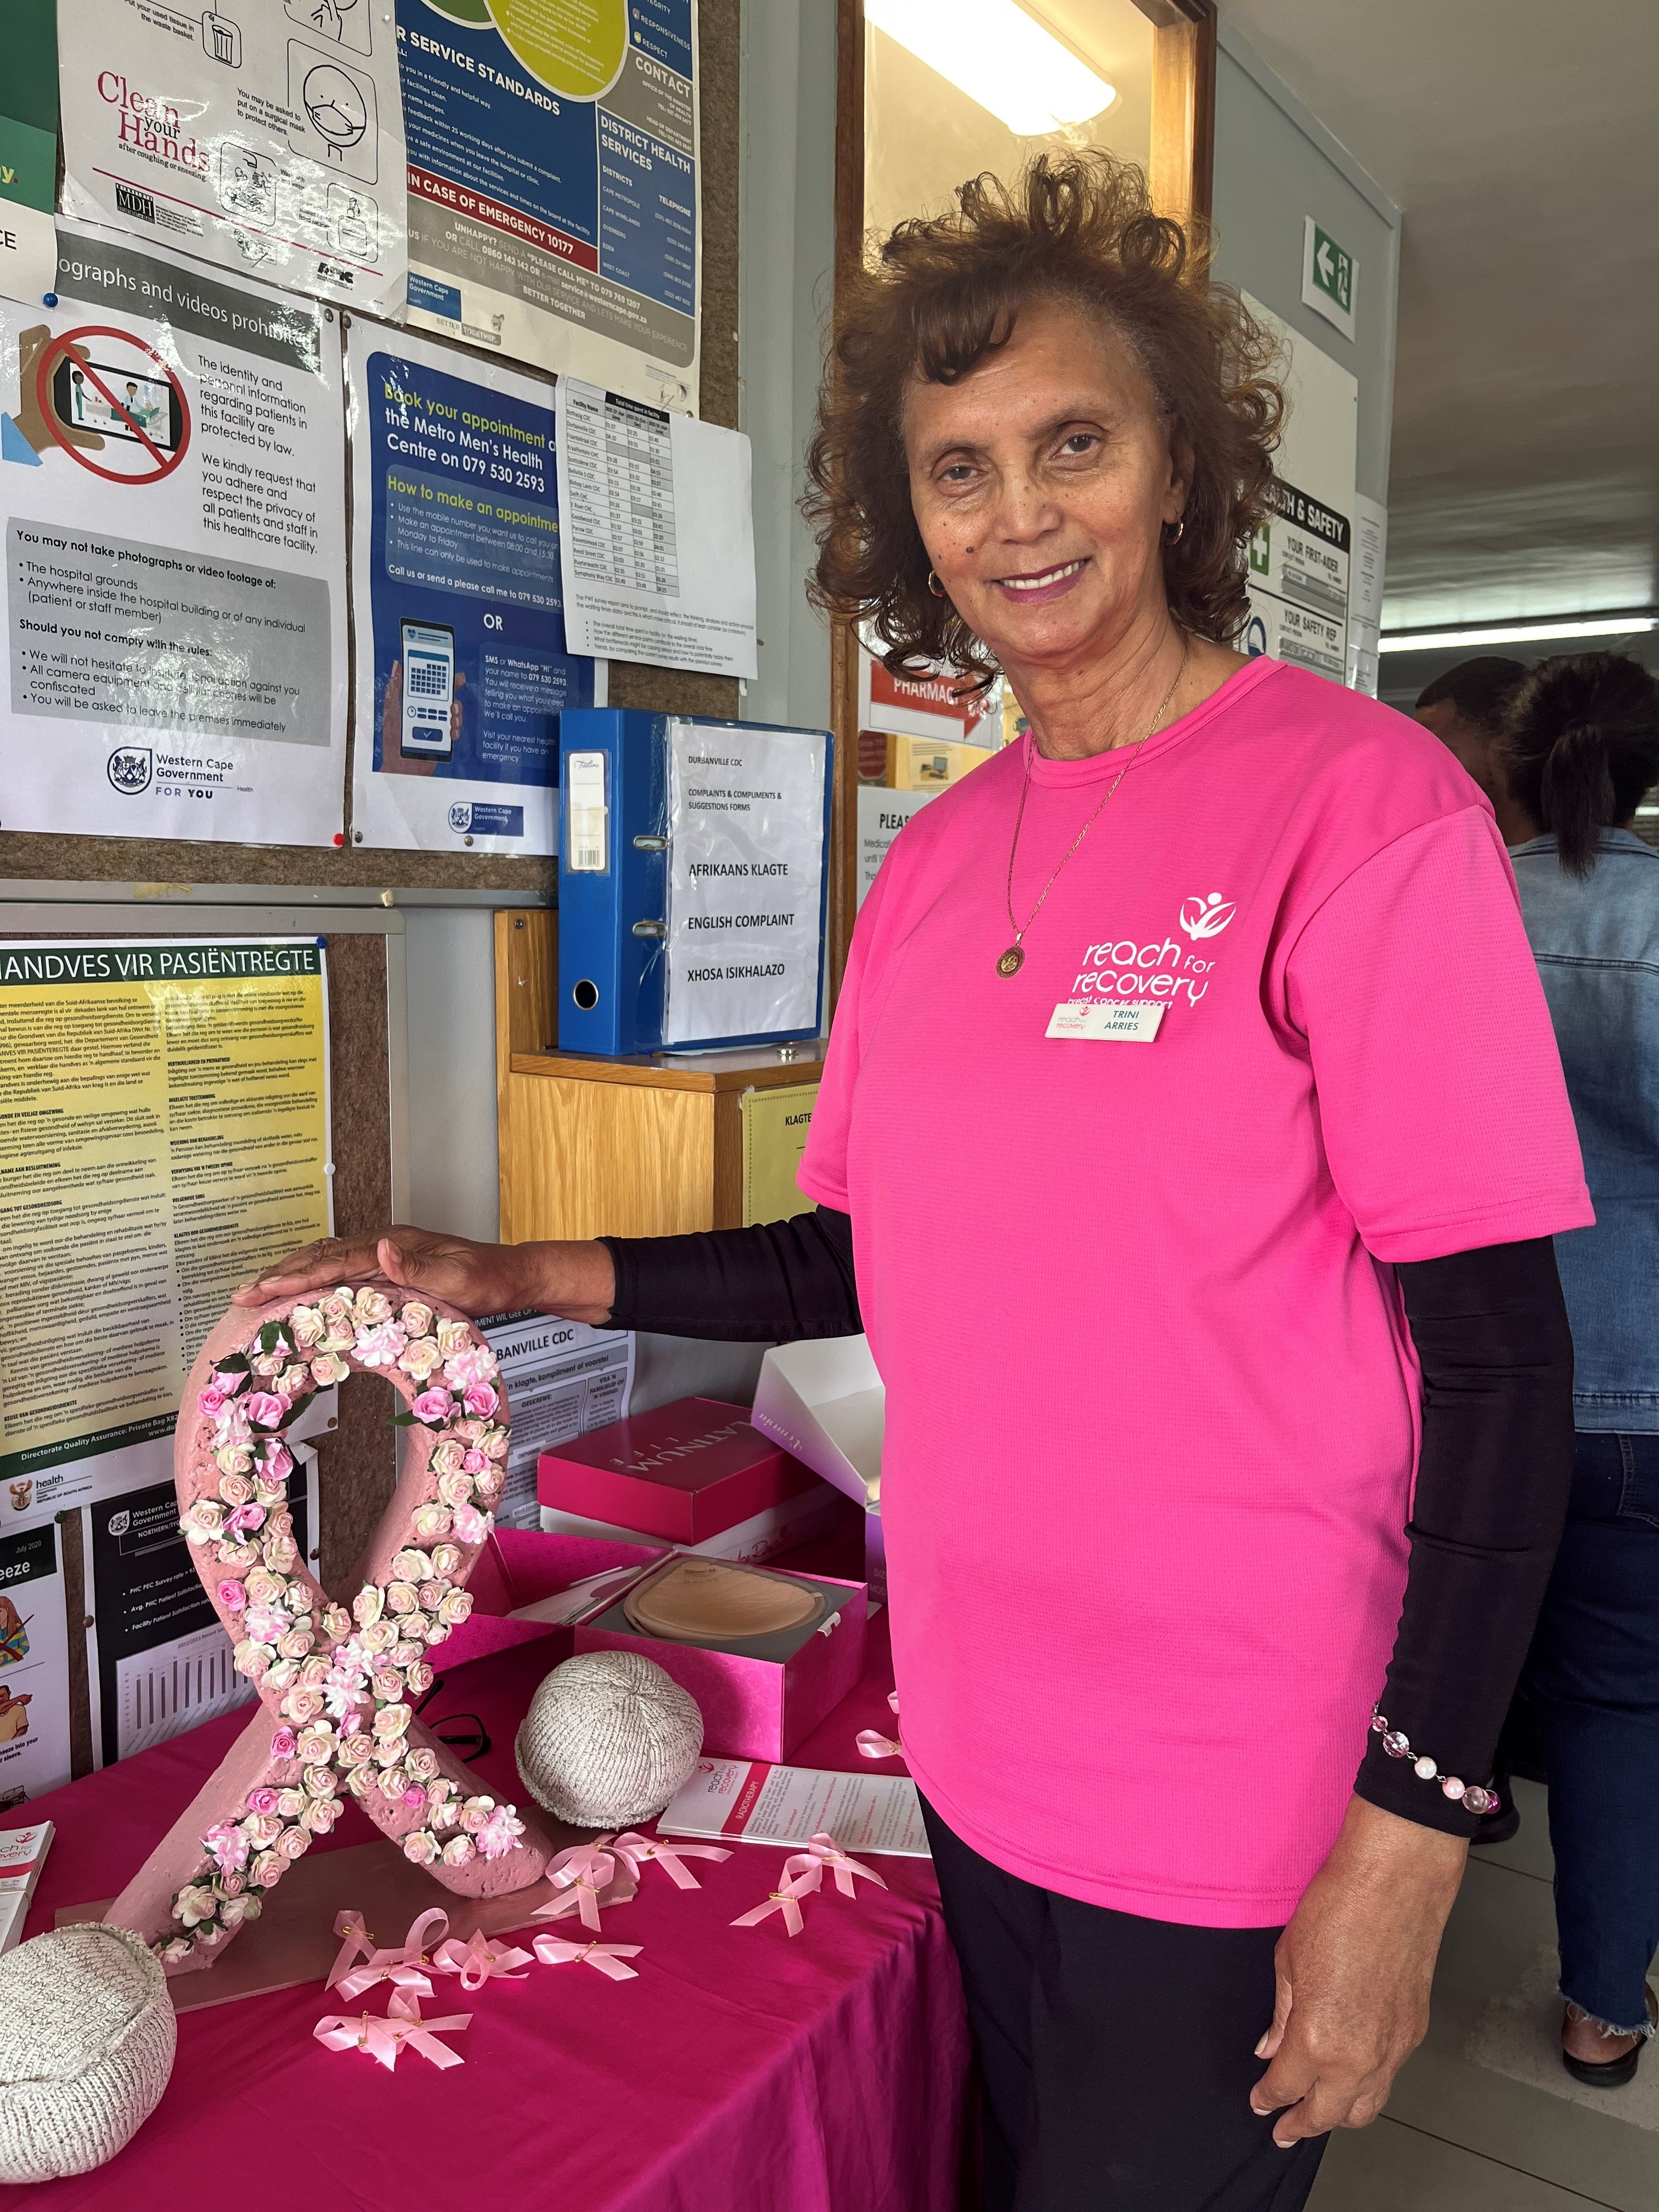 Breast cancer survivor Trini Arries says early detection is key. She has encouraged all women and men to learn more about the signs of breast cancer.